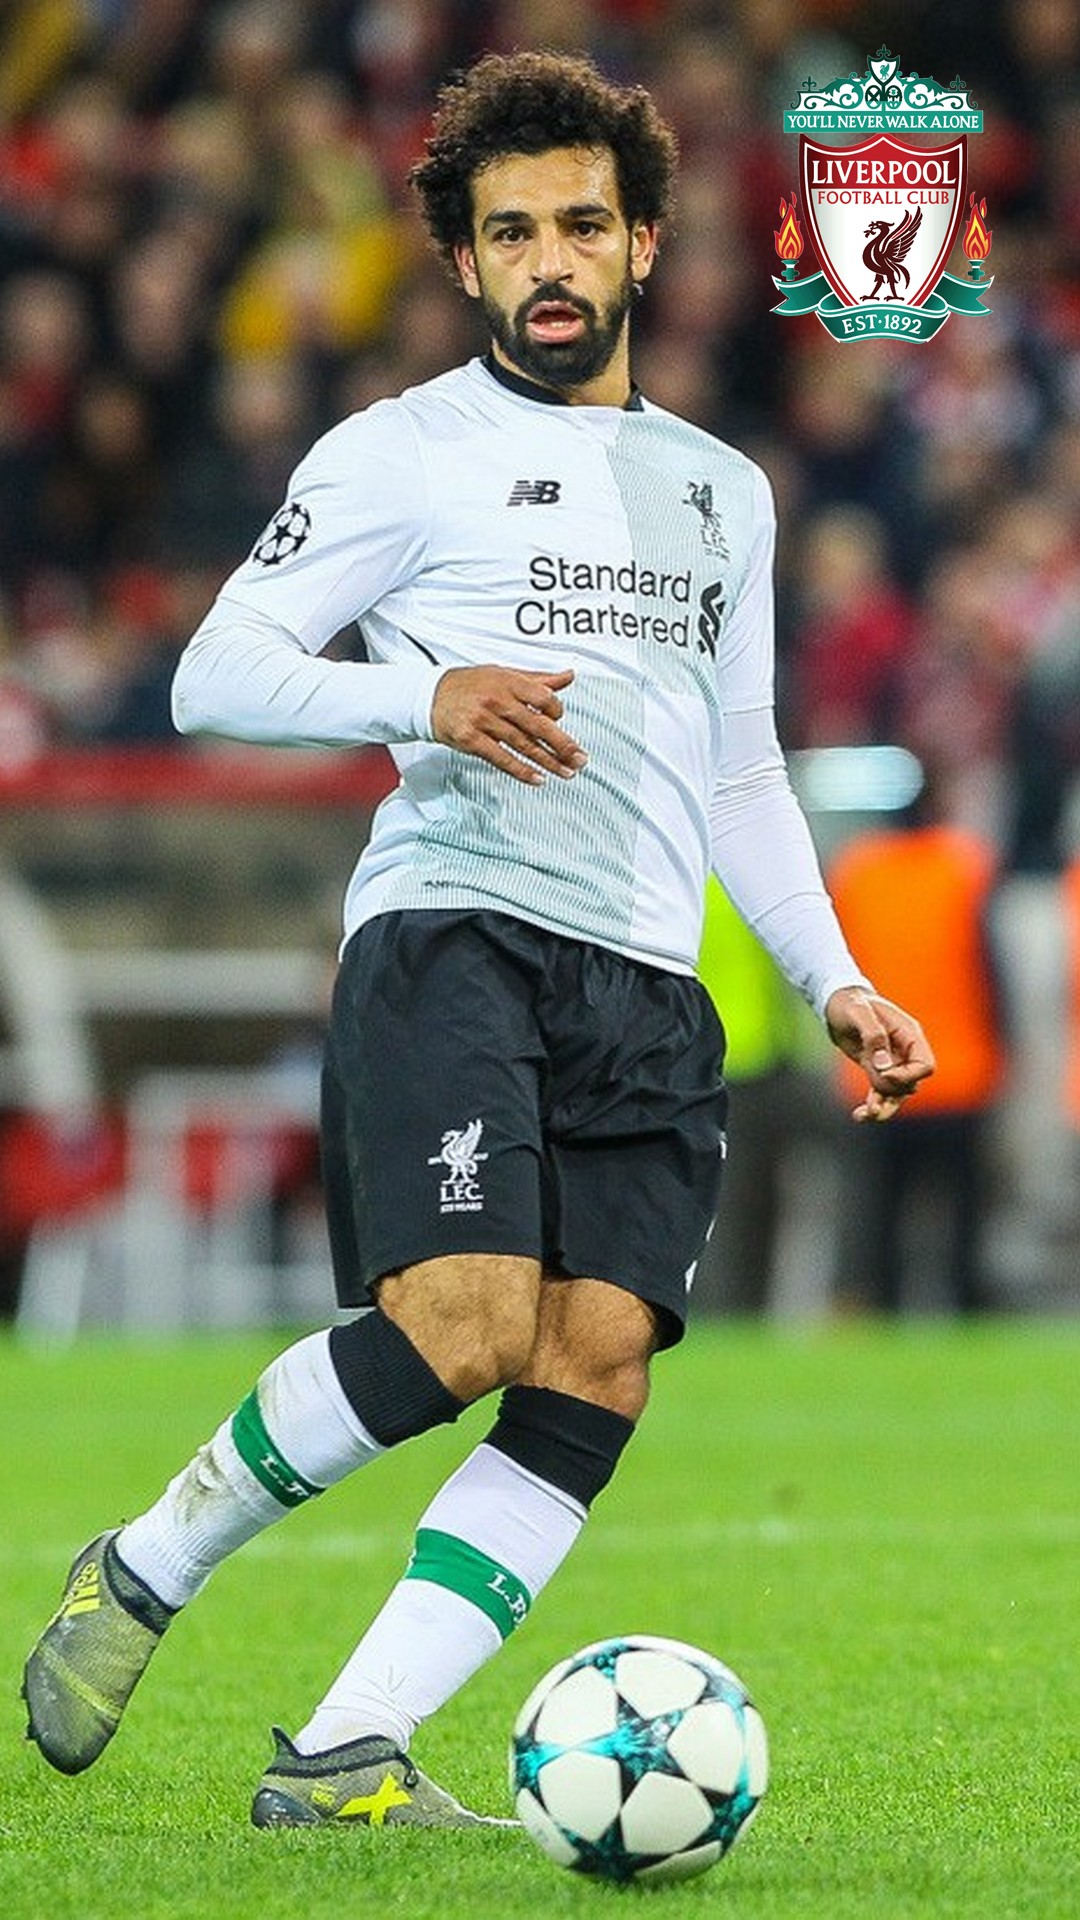 Mohamed Salah Liverpool Wallpaper For Android with resolution 1080X1920 pixel. You can make this wallpaper for your Android backgrounds, Tablet, Smartphones Screensavers and Mobile Phone Lock Screen